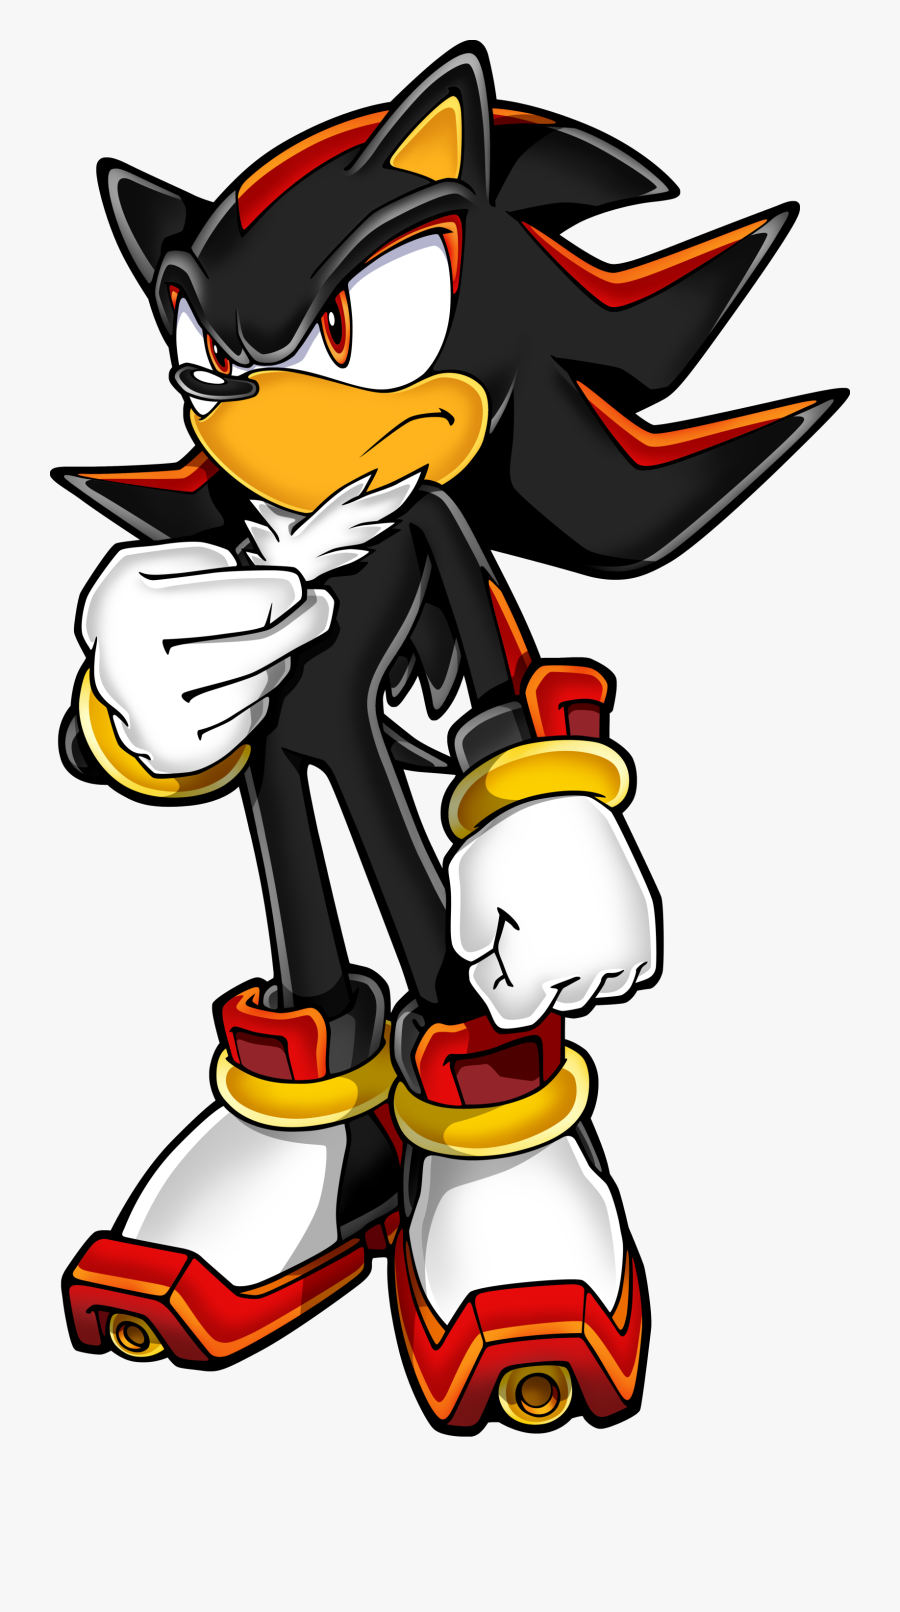 Shadow The Hedgehog Clipart To Printable To - Shadow The Hedgehog Art, Transparent Clipart